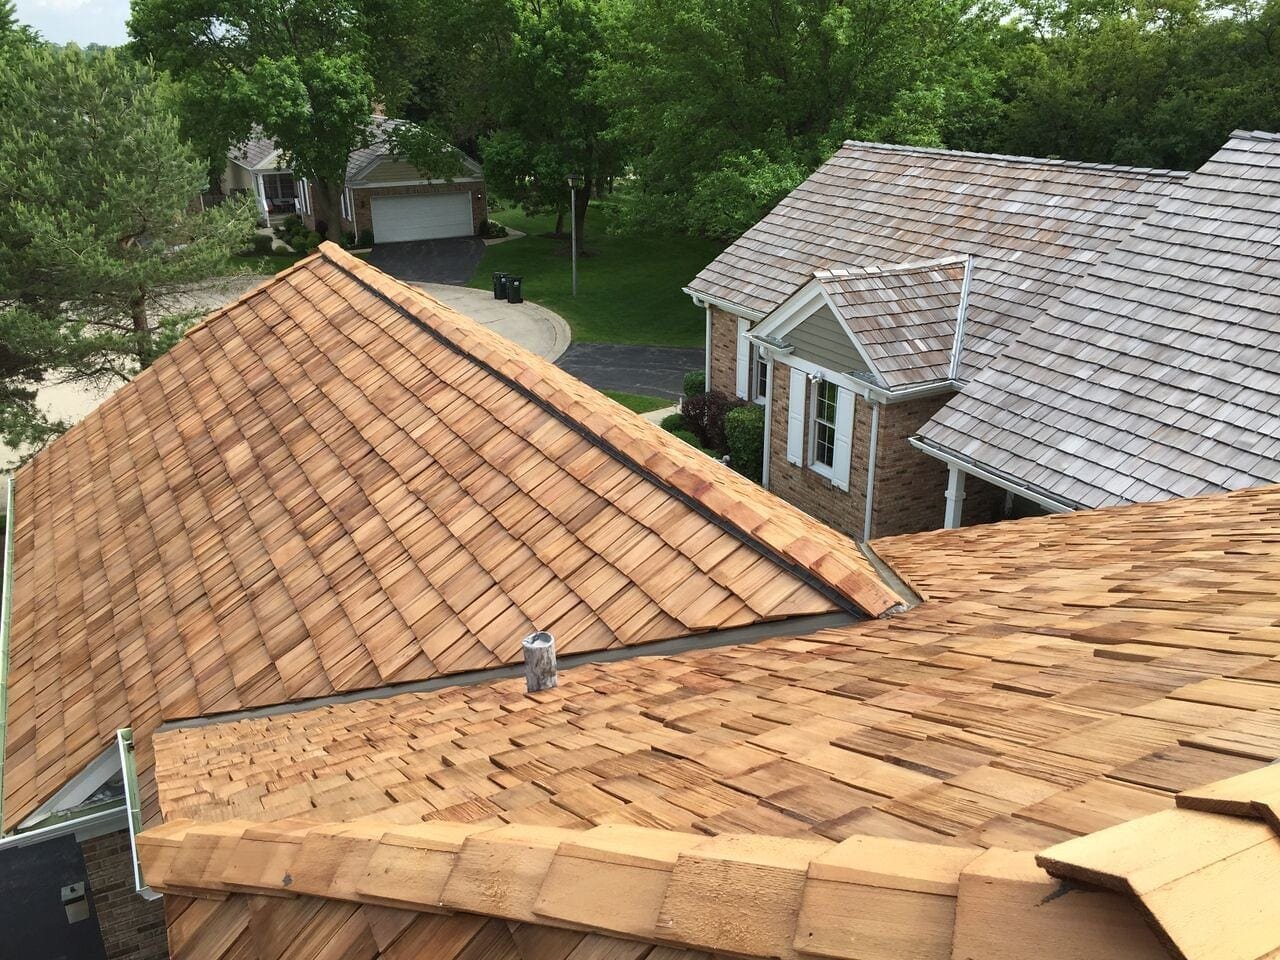 A roofing inspection can extend the life of your cedar roof.